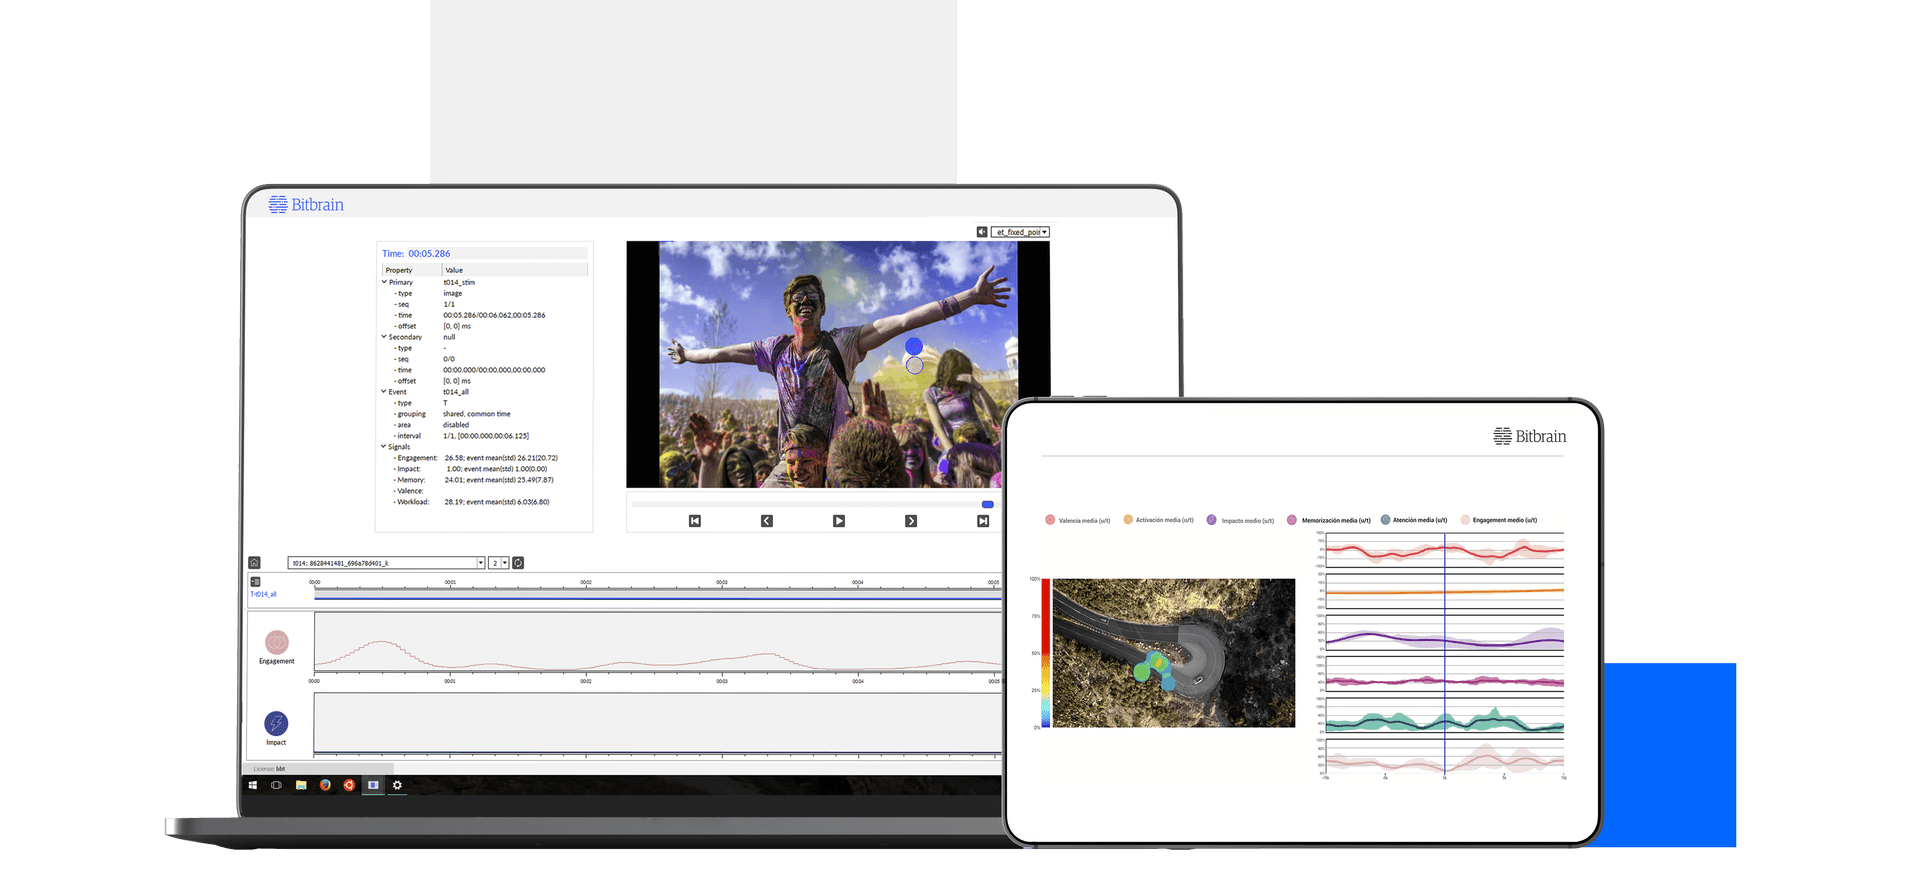 biosignals and biometrics synchronization software for human behaviour research